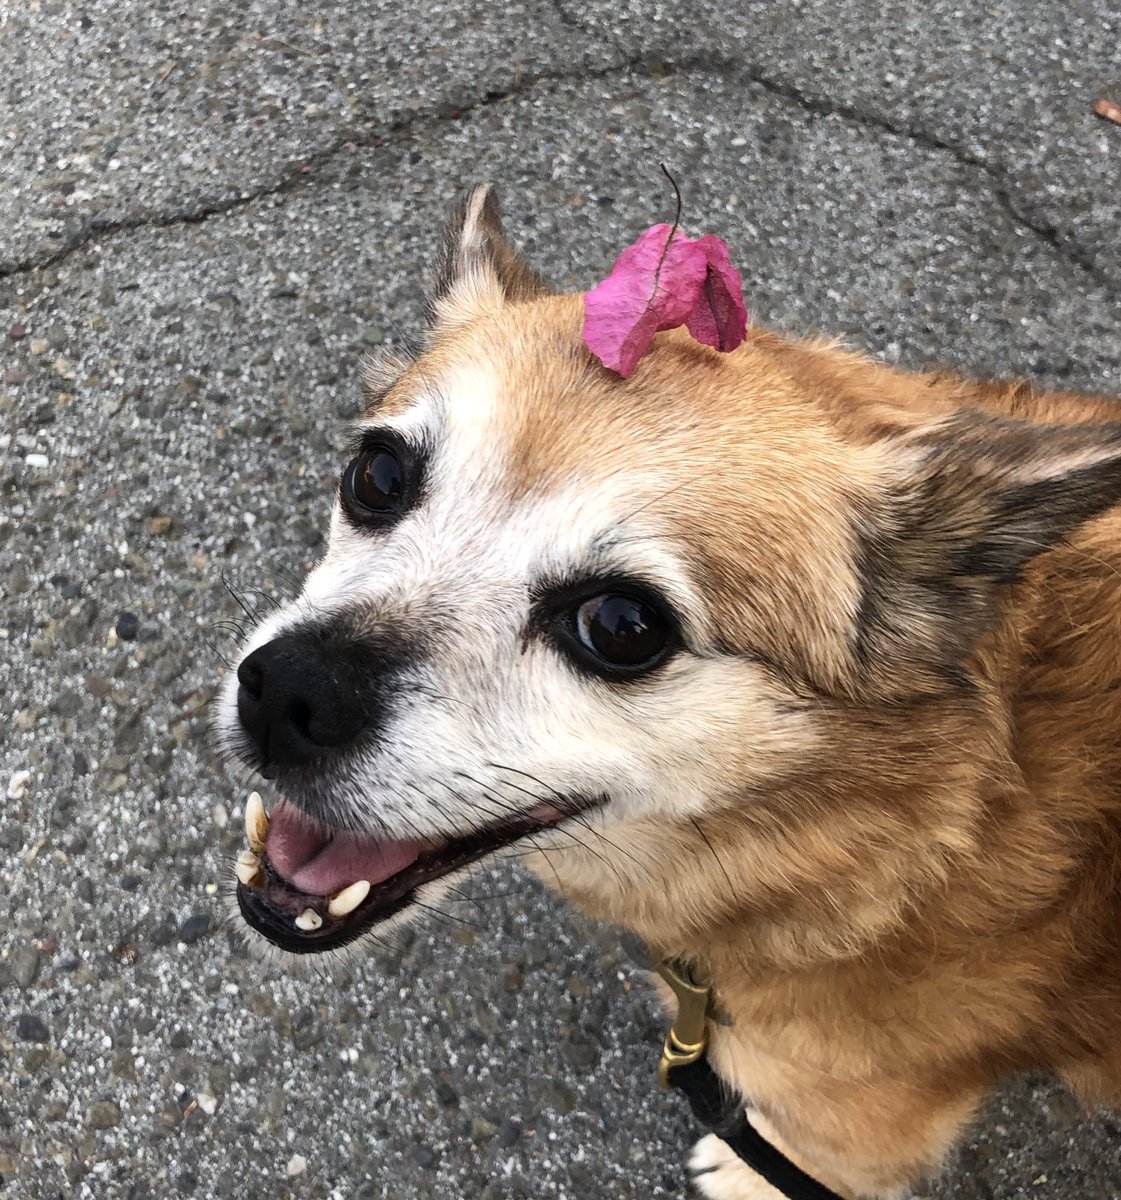 @dog_rates That’s an awesome hat. Here is Minnie with her Bouganvillea hat 👒